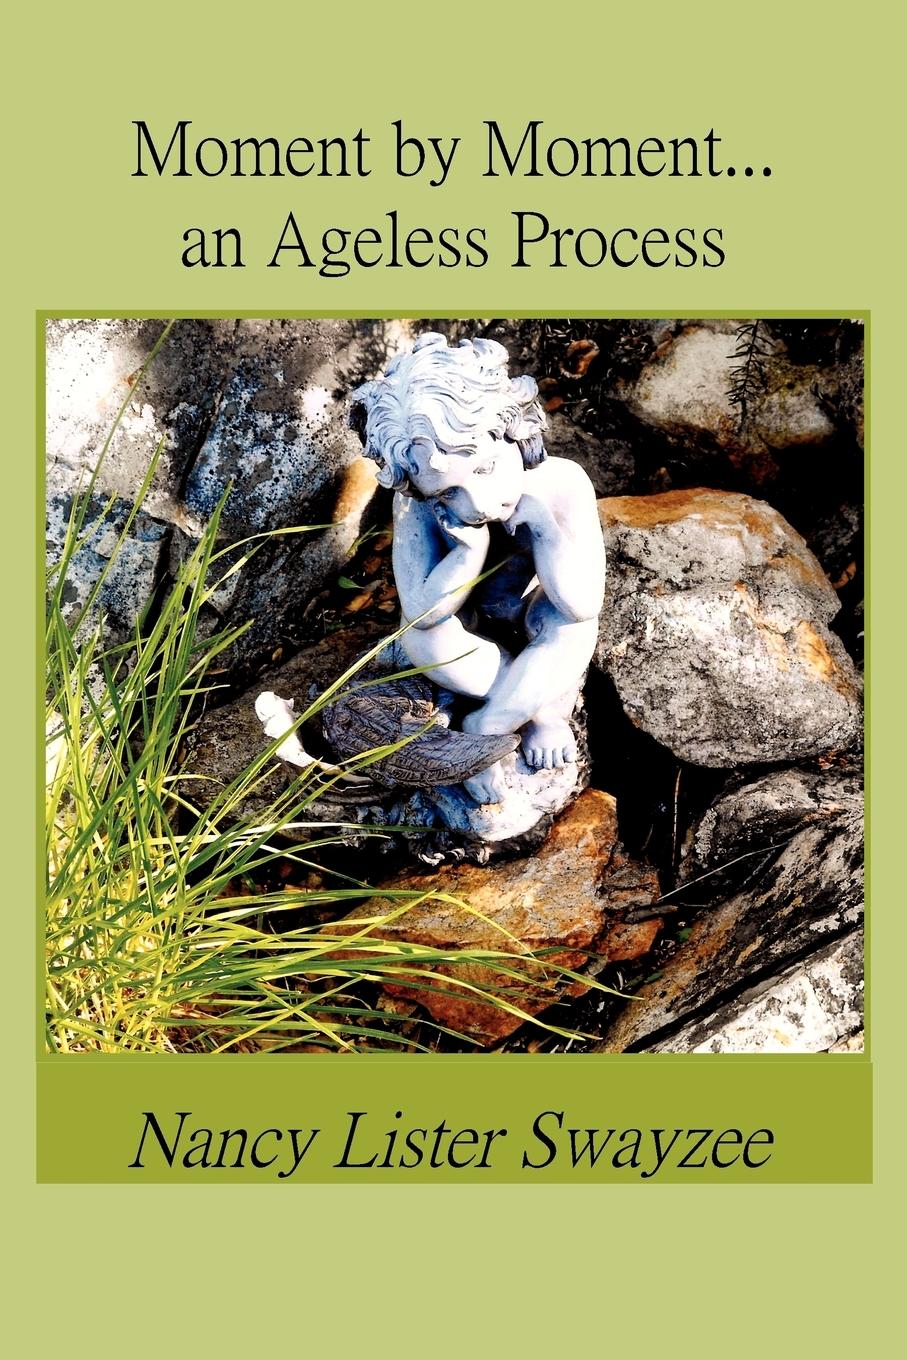 Moment by Moment...an Ageless Process - Swayzee, Nancy Lister